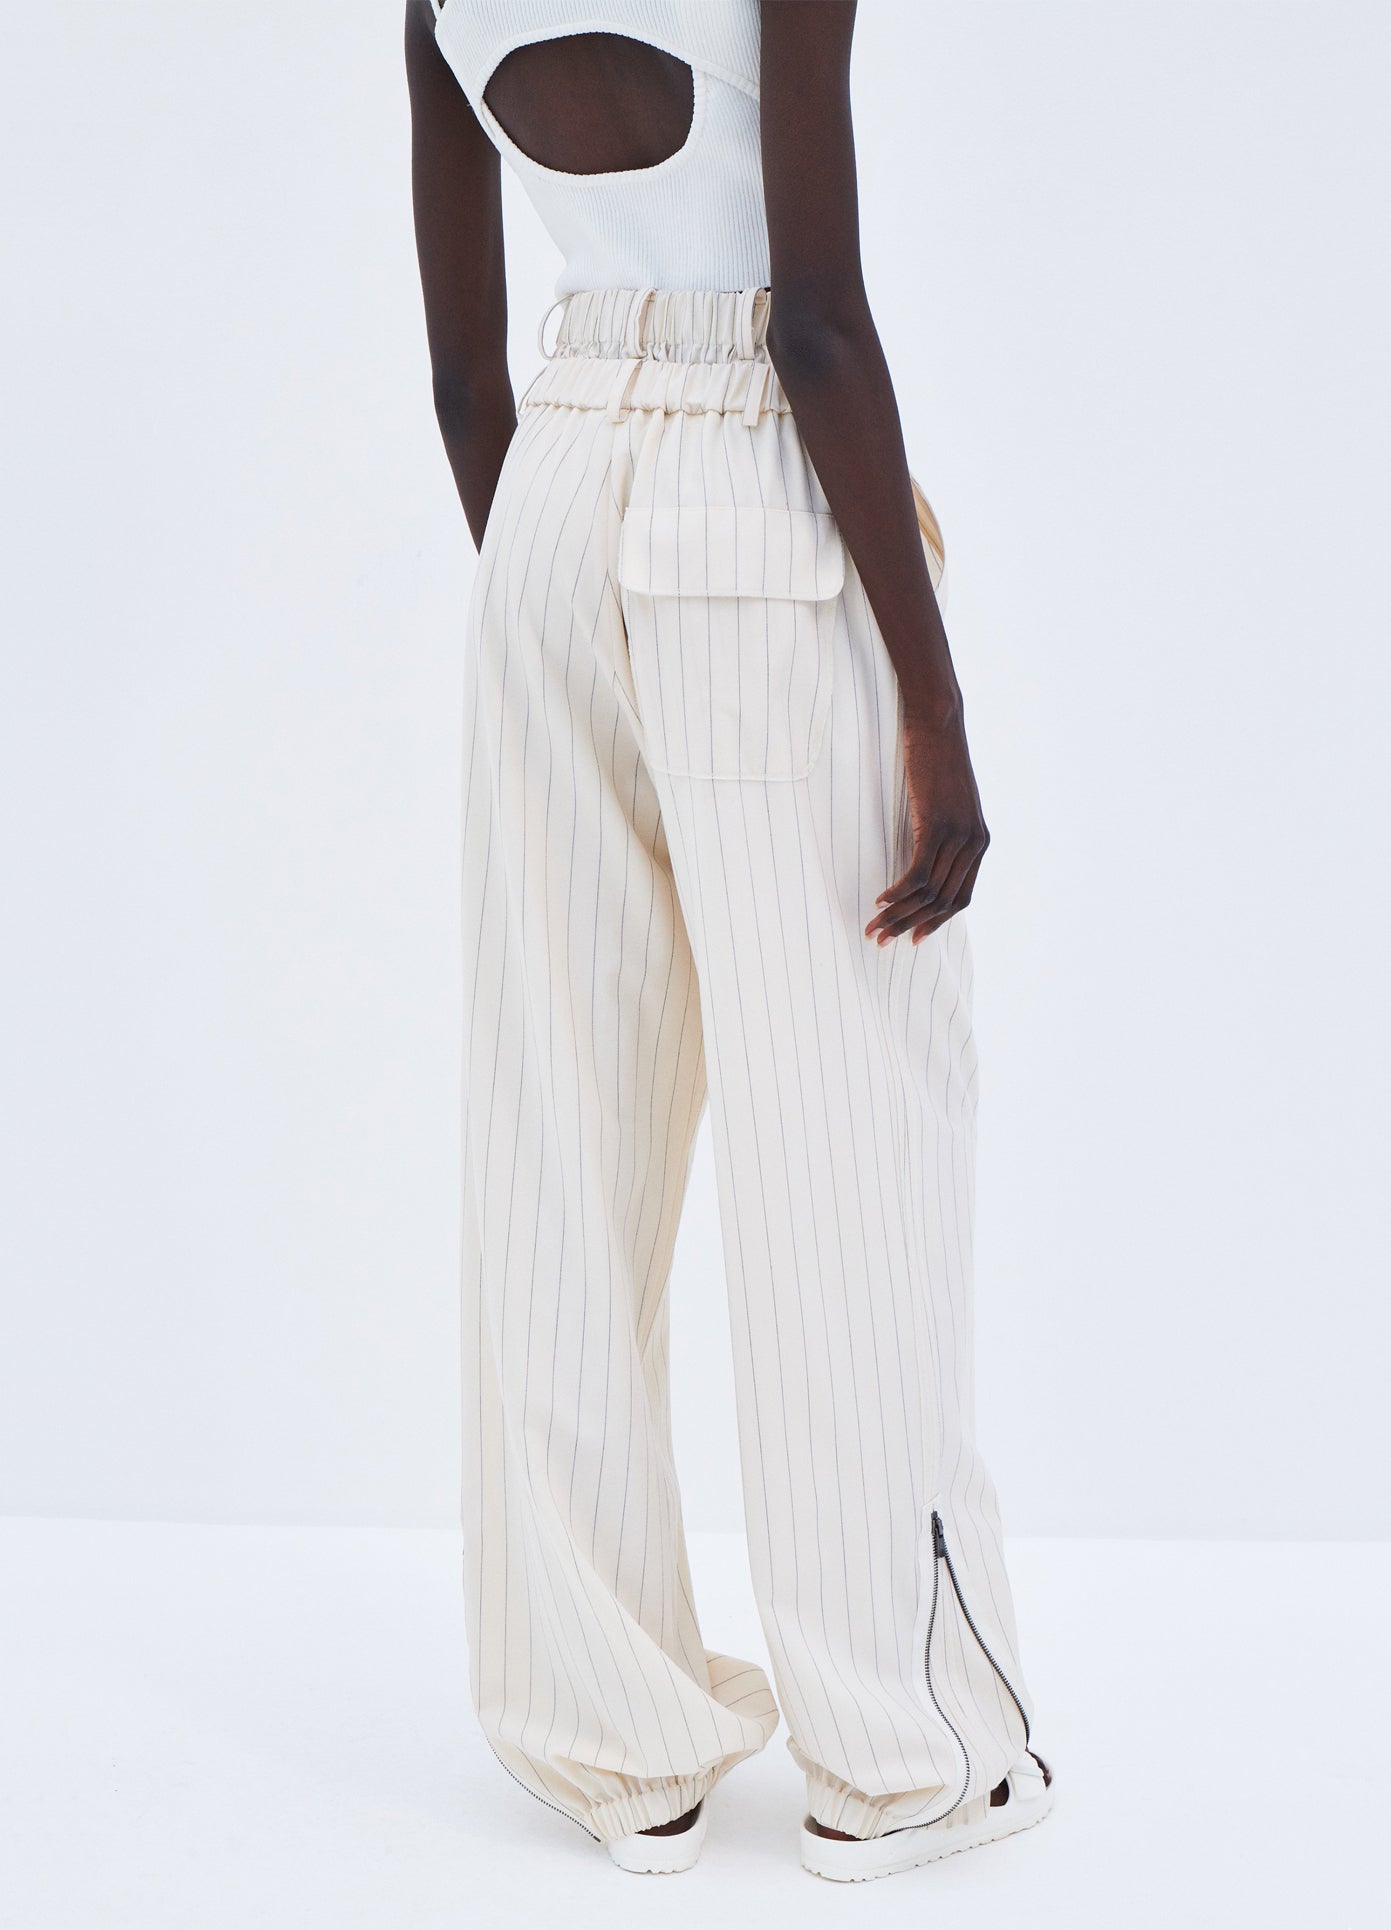 MONSE Pinstripe Double Waistband Zip Detail Pant in Ivory Pinstripe on model back detail view